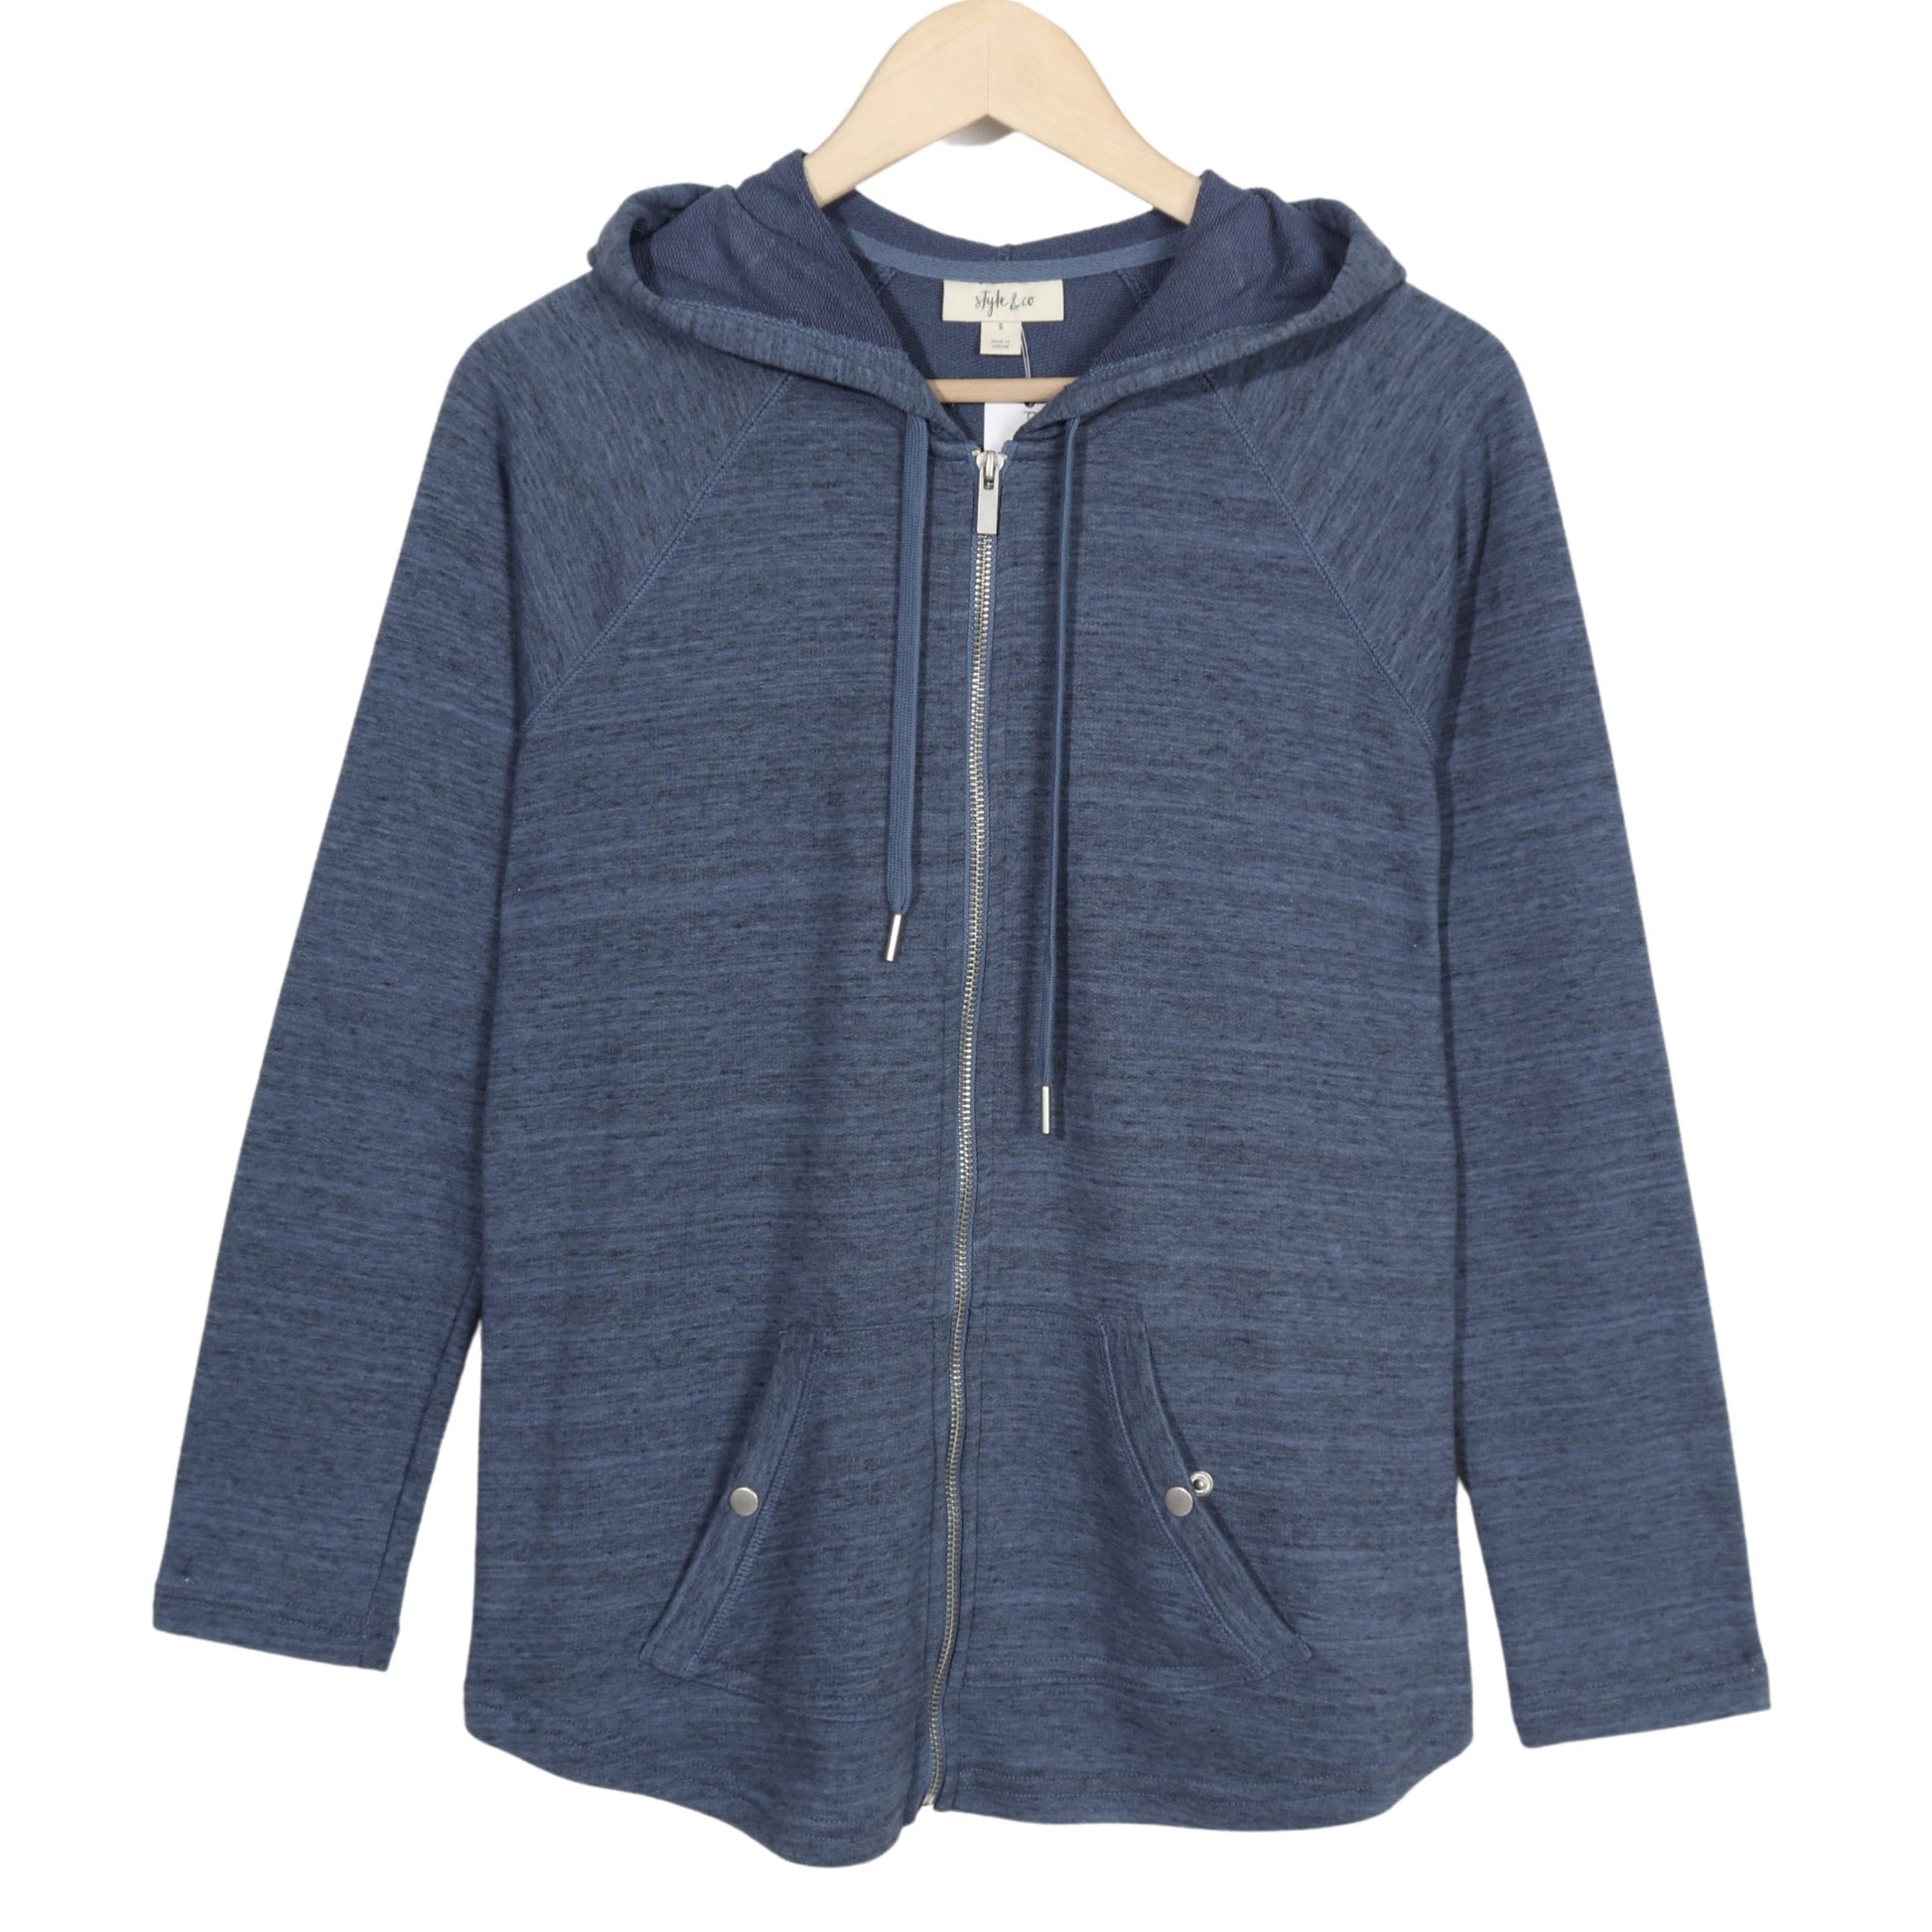 STYLE & CO. Womens Jackets S / Navy STYLE & CO. - Hooded Jacket